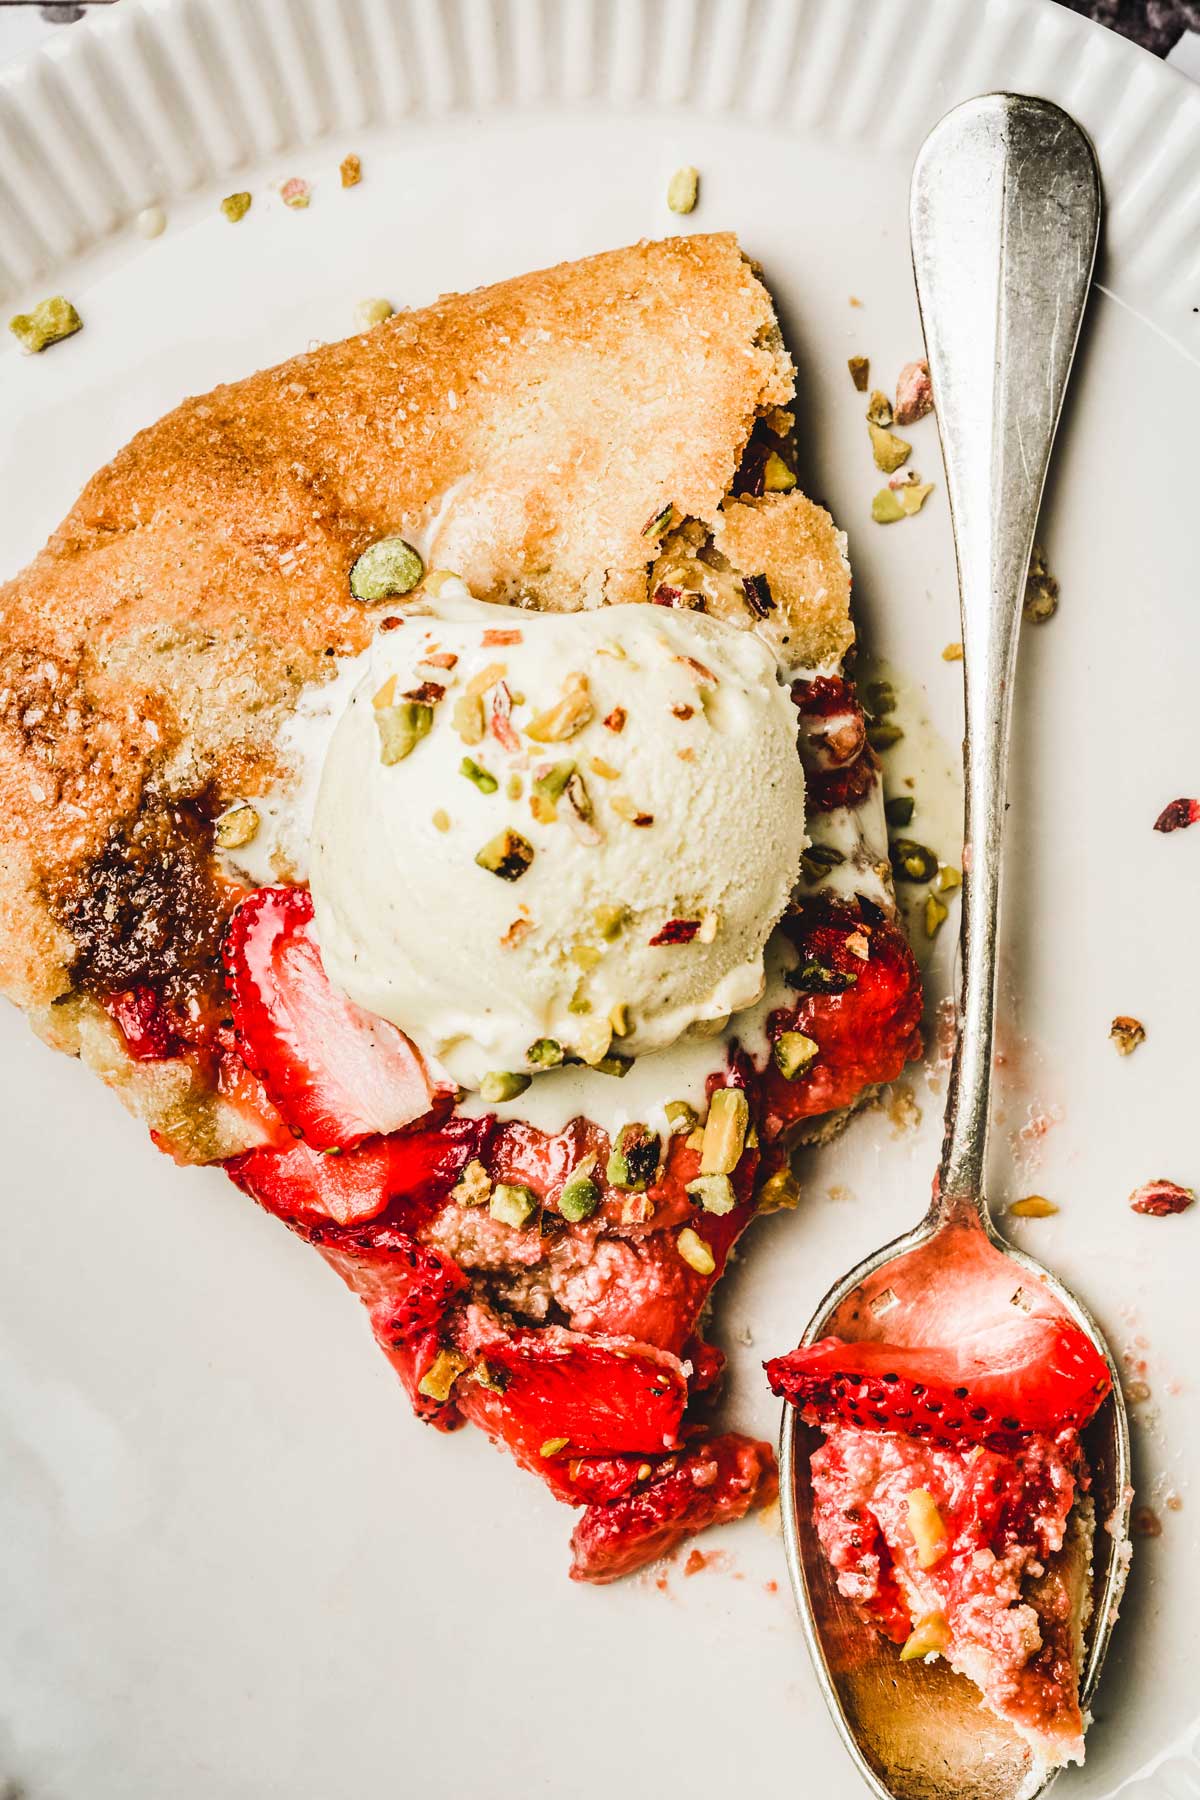 Rustic strawberry tart with ice cream on a plate